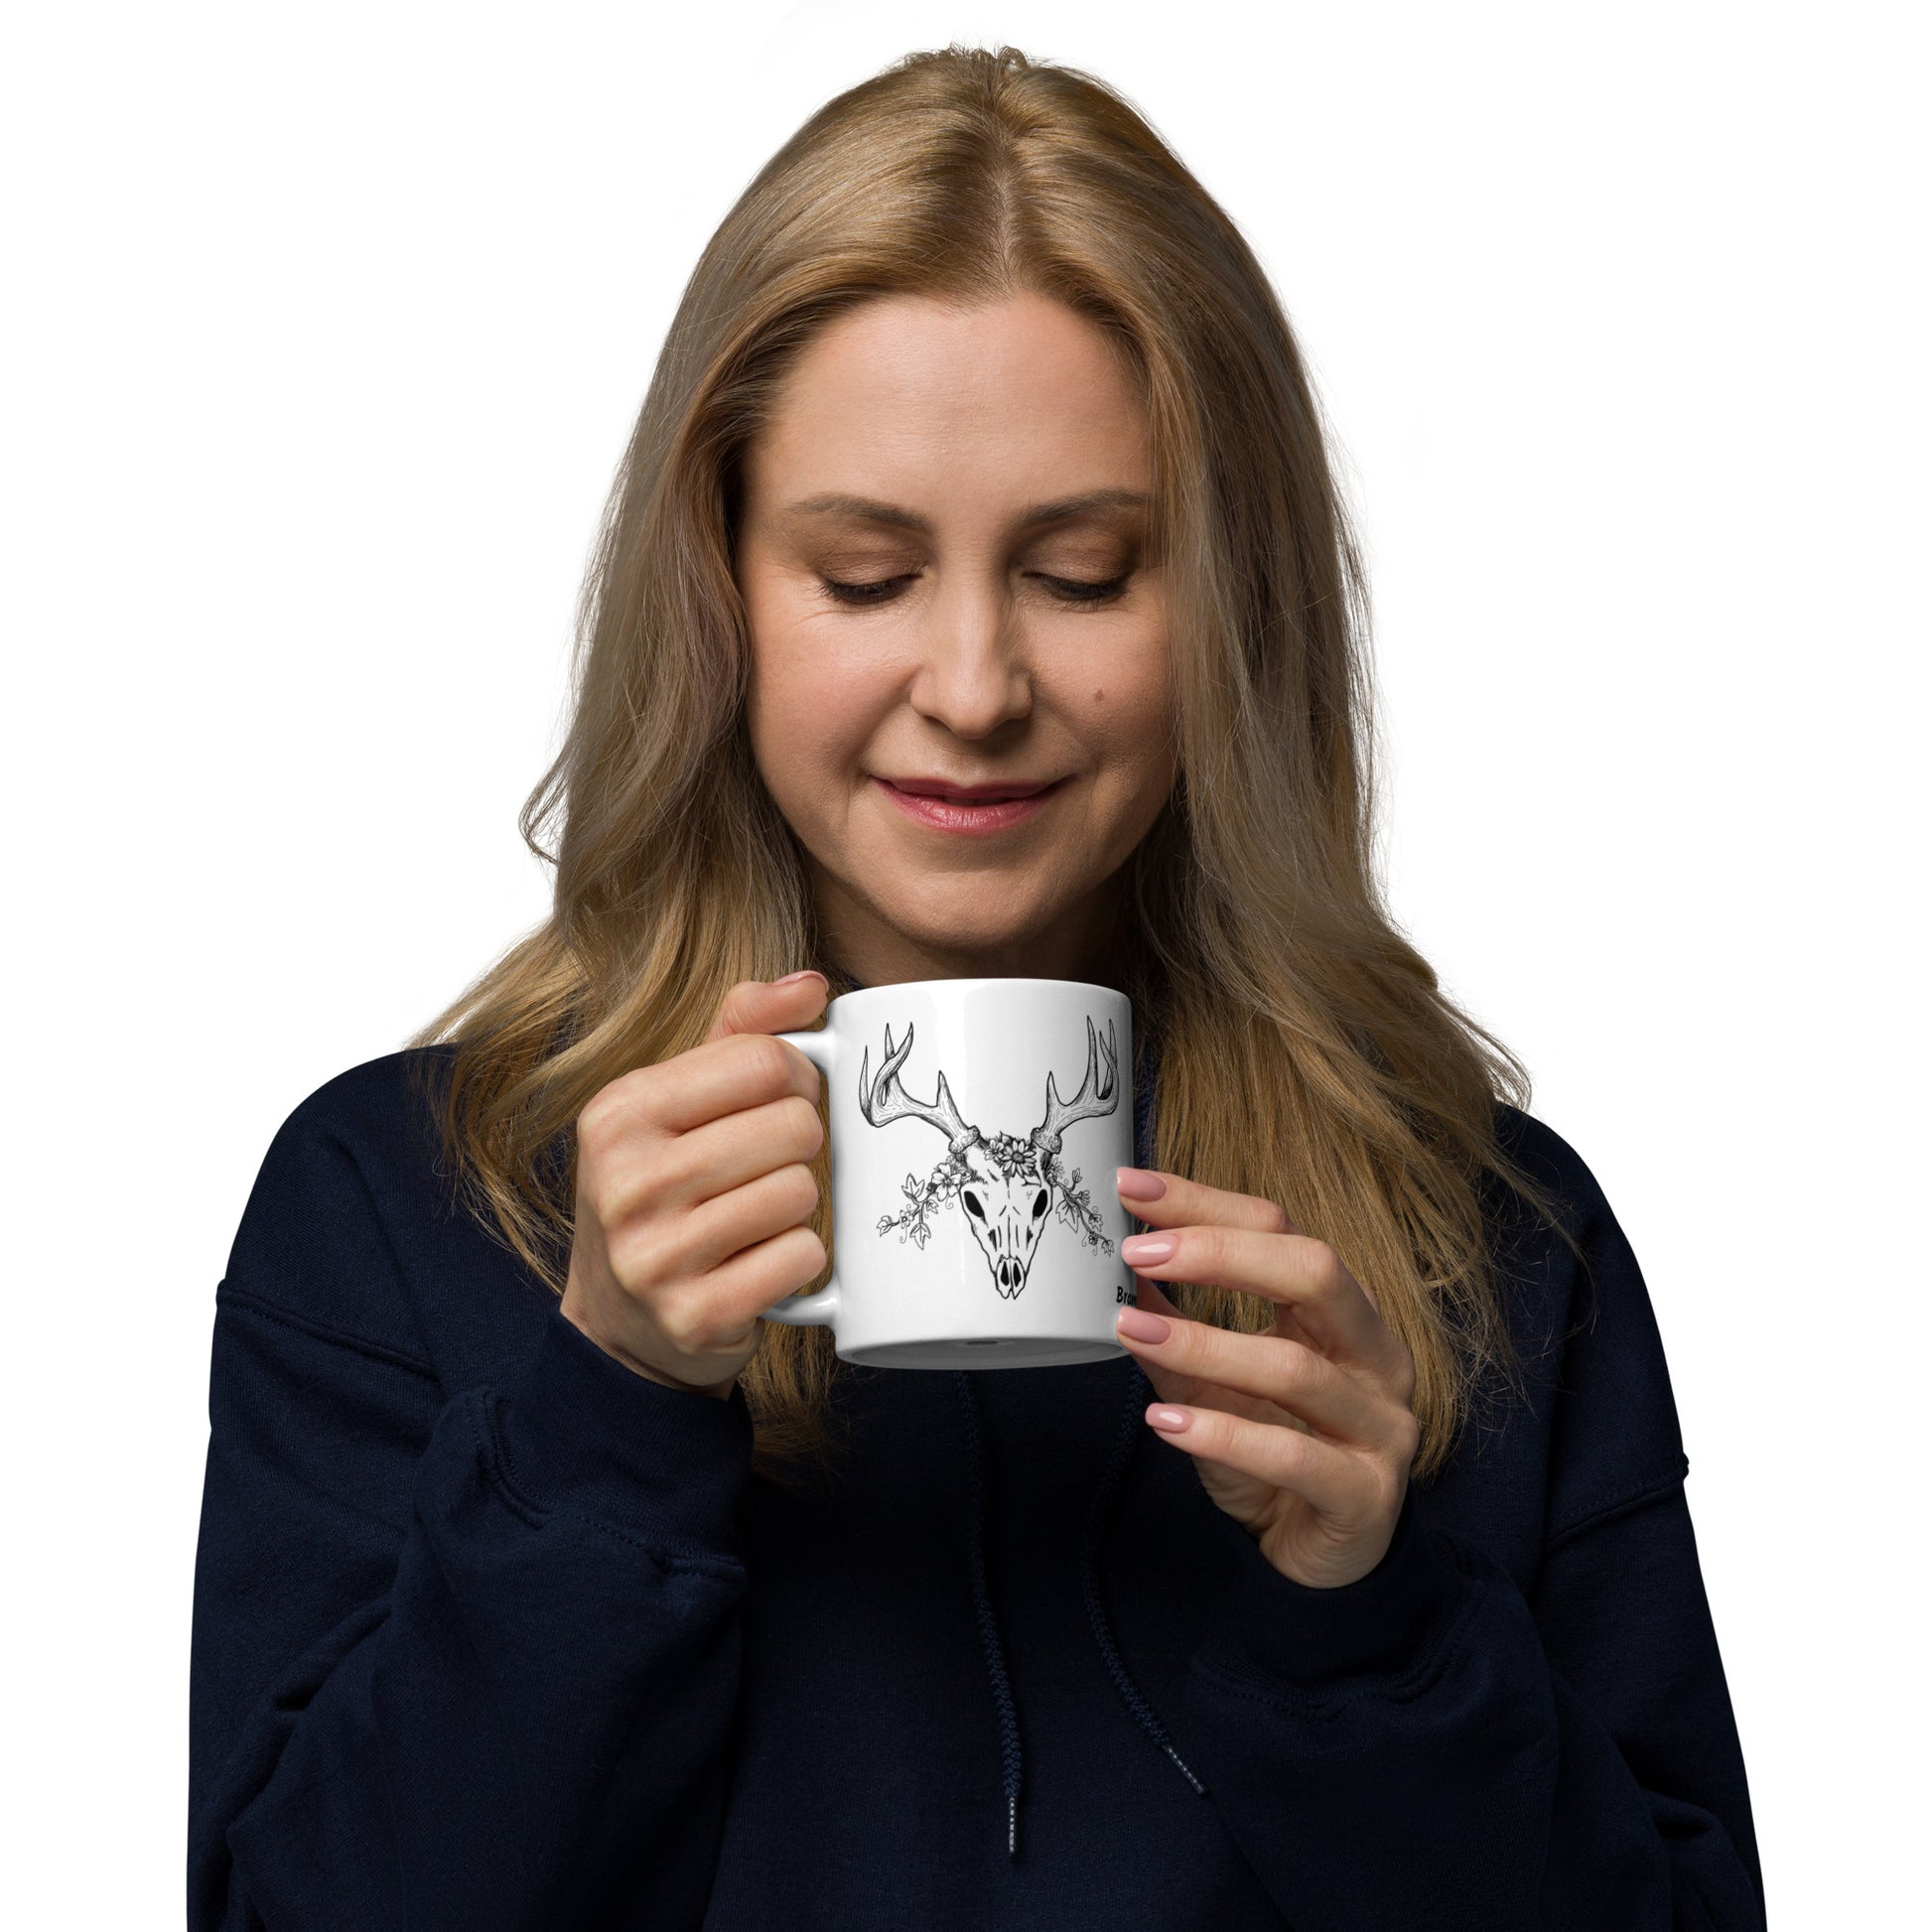 11 oz white ceramic mug. Features a double-sided hand illustrated image of a deer skull wreathed in flowers. Shown in female model's hand.